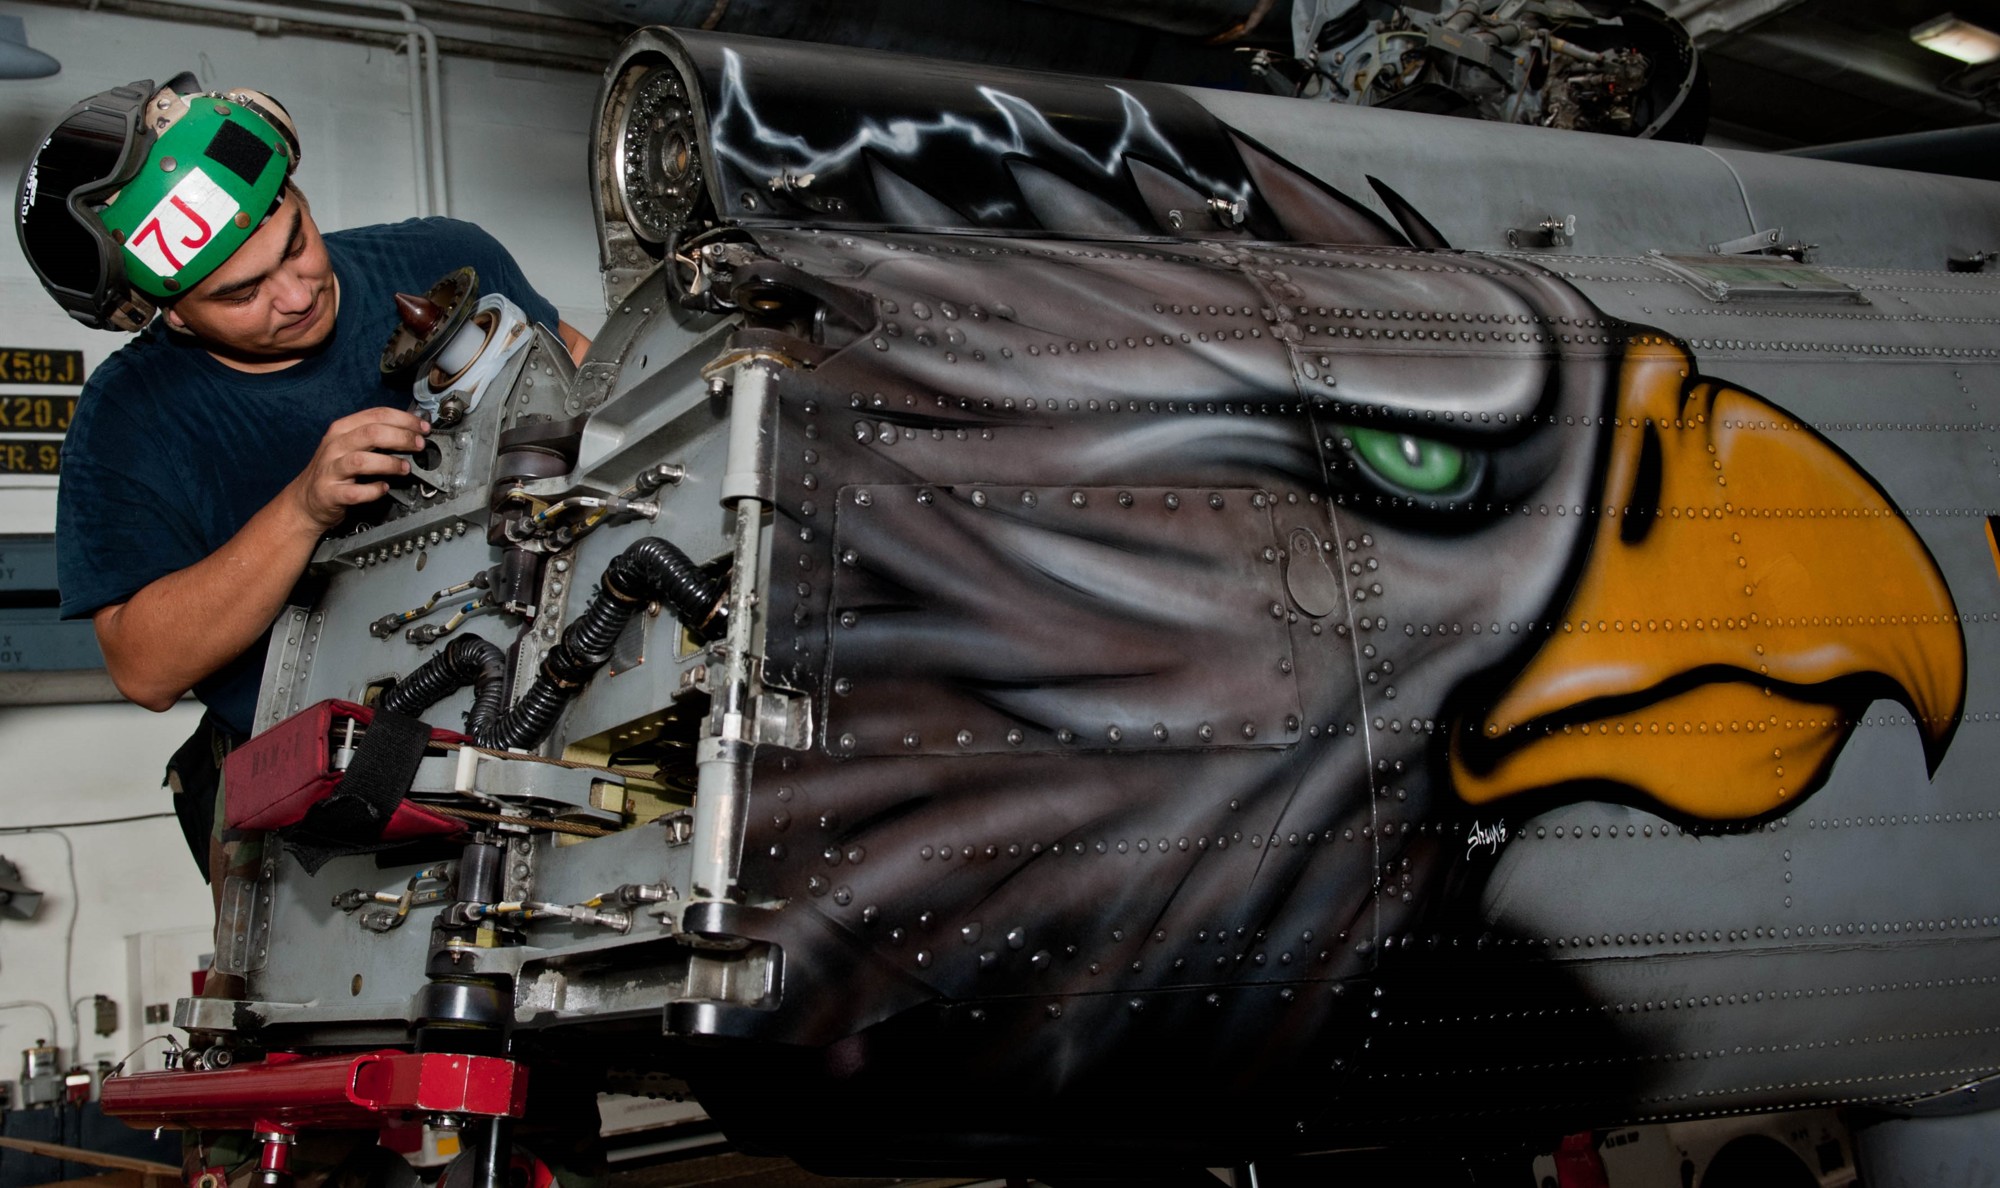 hsm-71 raptors helicopter maritime strike squadron mh-60r seahawk navy 2012 30 special painting